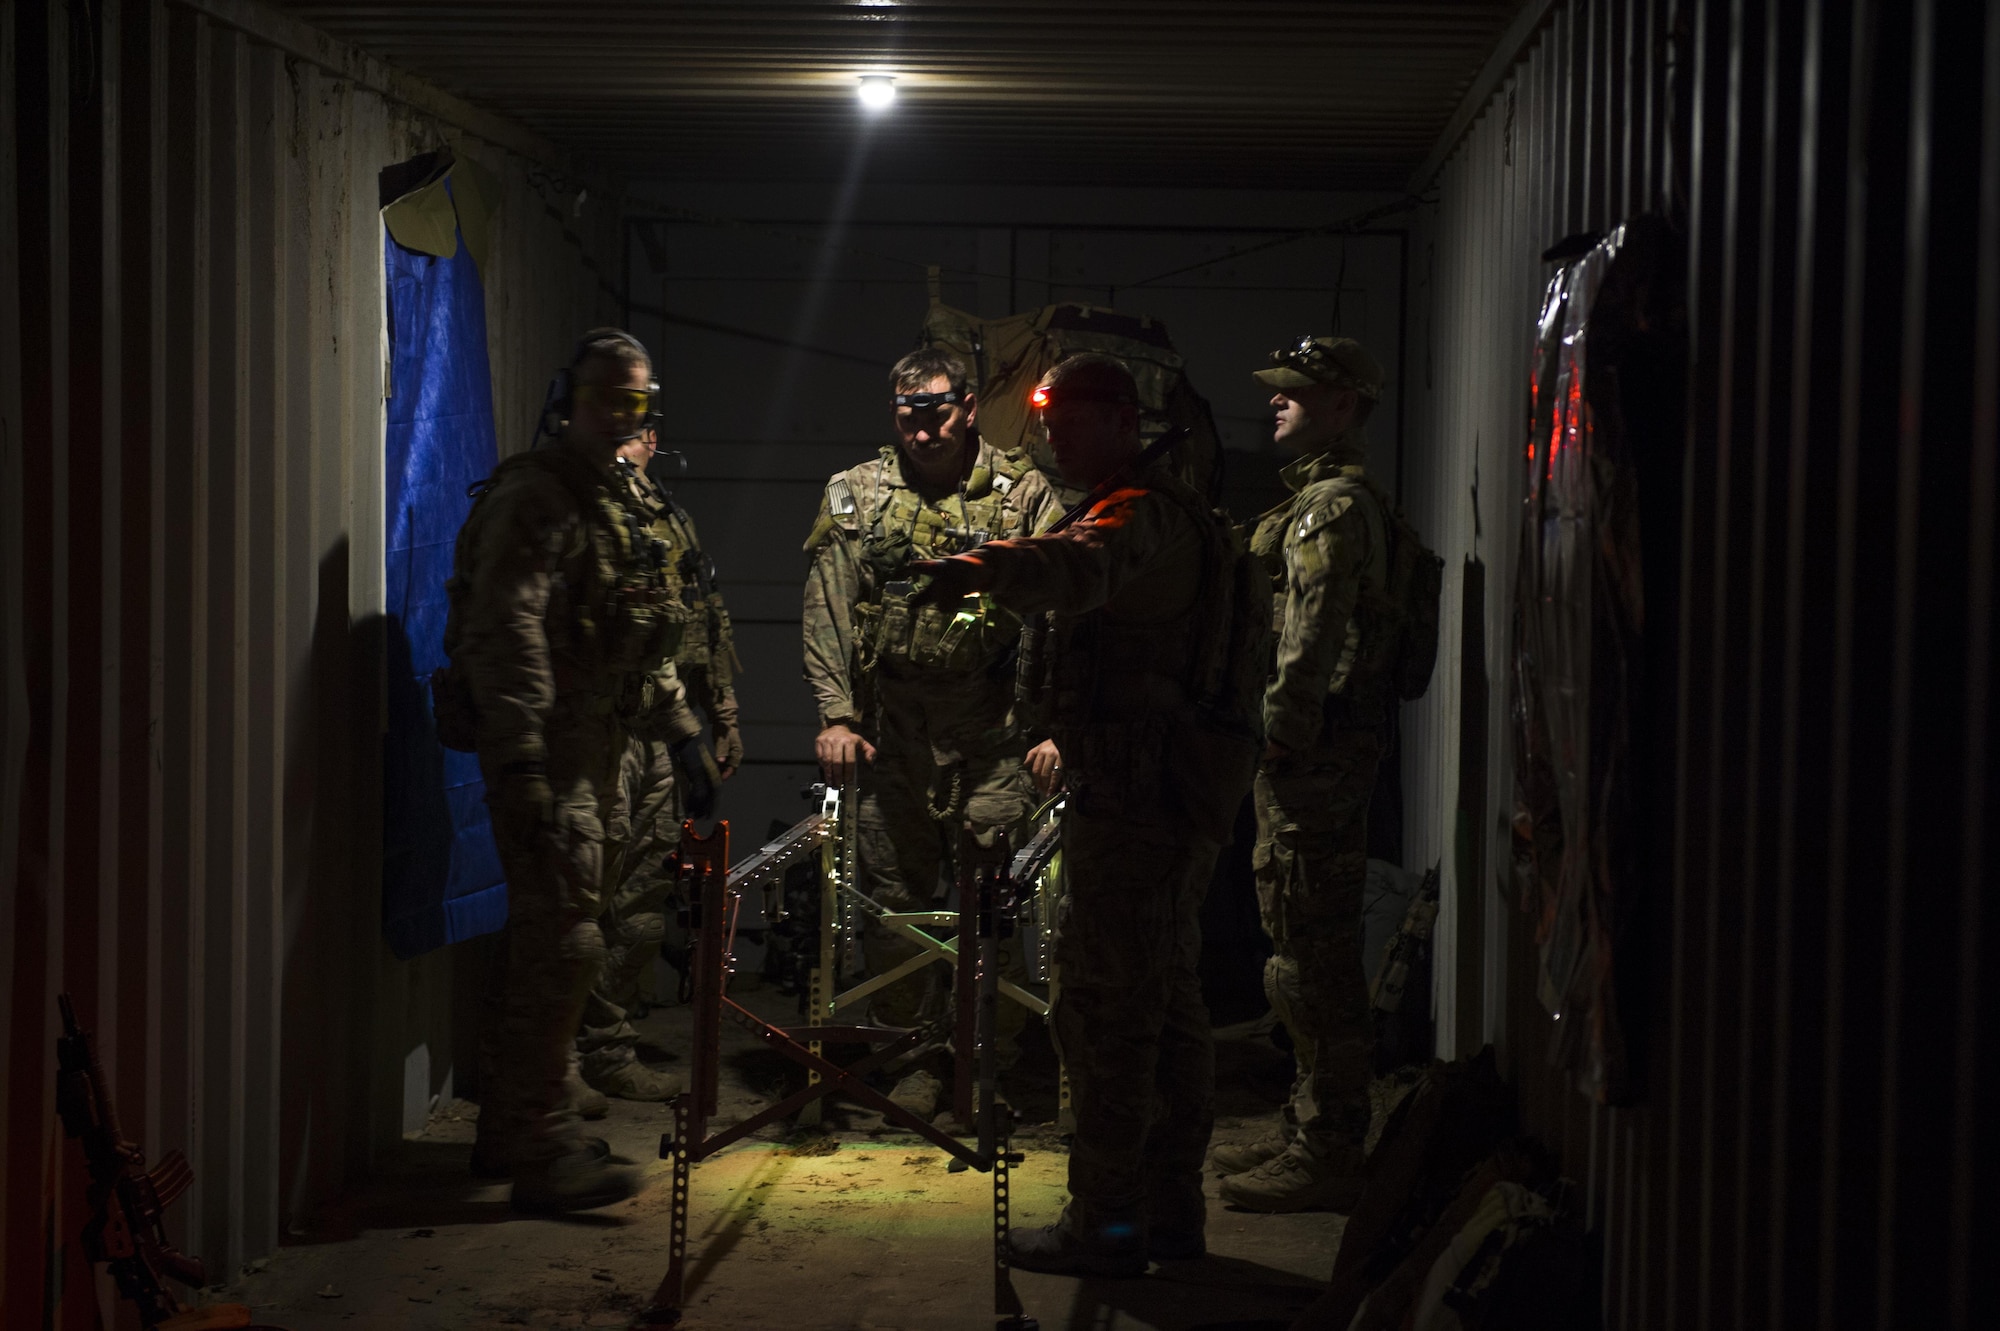 U.S. Air Force Special Operations Surgical Teams practiced integration operations with a special operations partner force during a Special Tactics exercise, Hurlburt Field, Fla., Oct. 16, 2015. SOST members are military medical professionals selected to provide battlefield trauma and other surgical support in a special operations mission set. SOST members often forward deploy to austere or hostile areas to perform life-saving trauma surgery for special operators with little to no facility support.